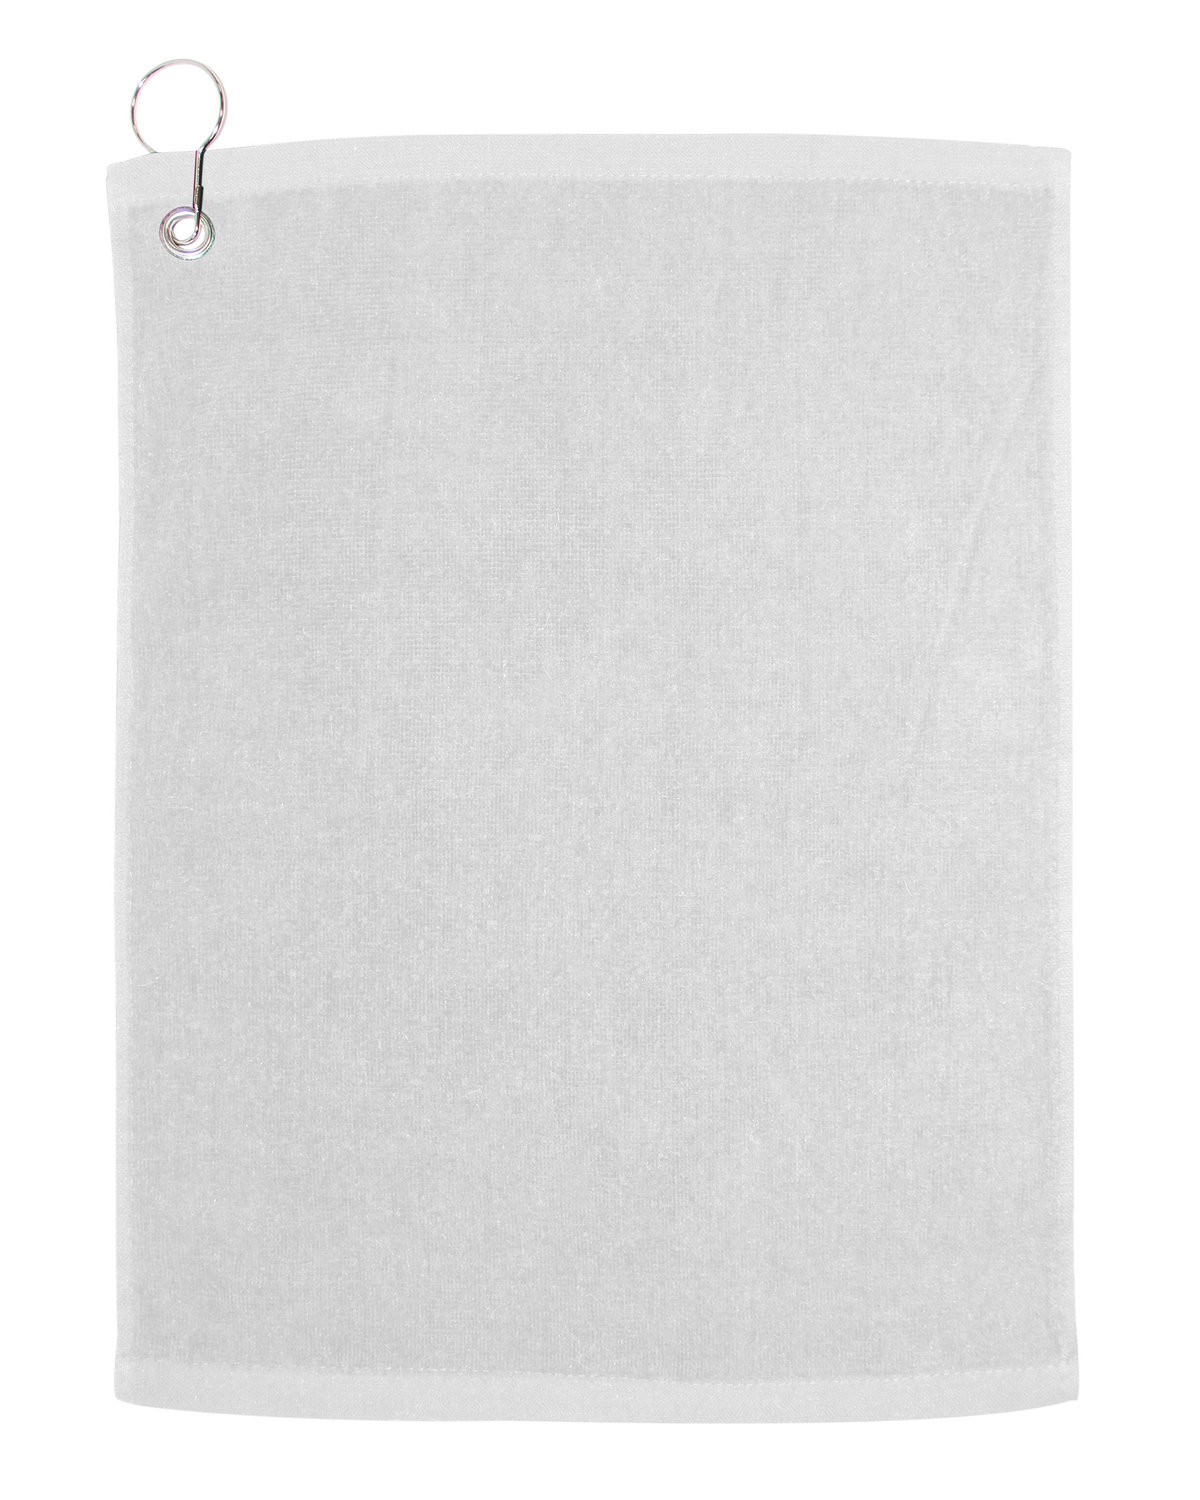 Large Rally Towel With Grommet And Hook-